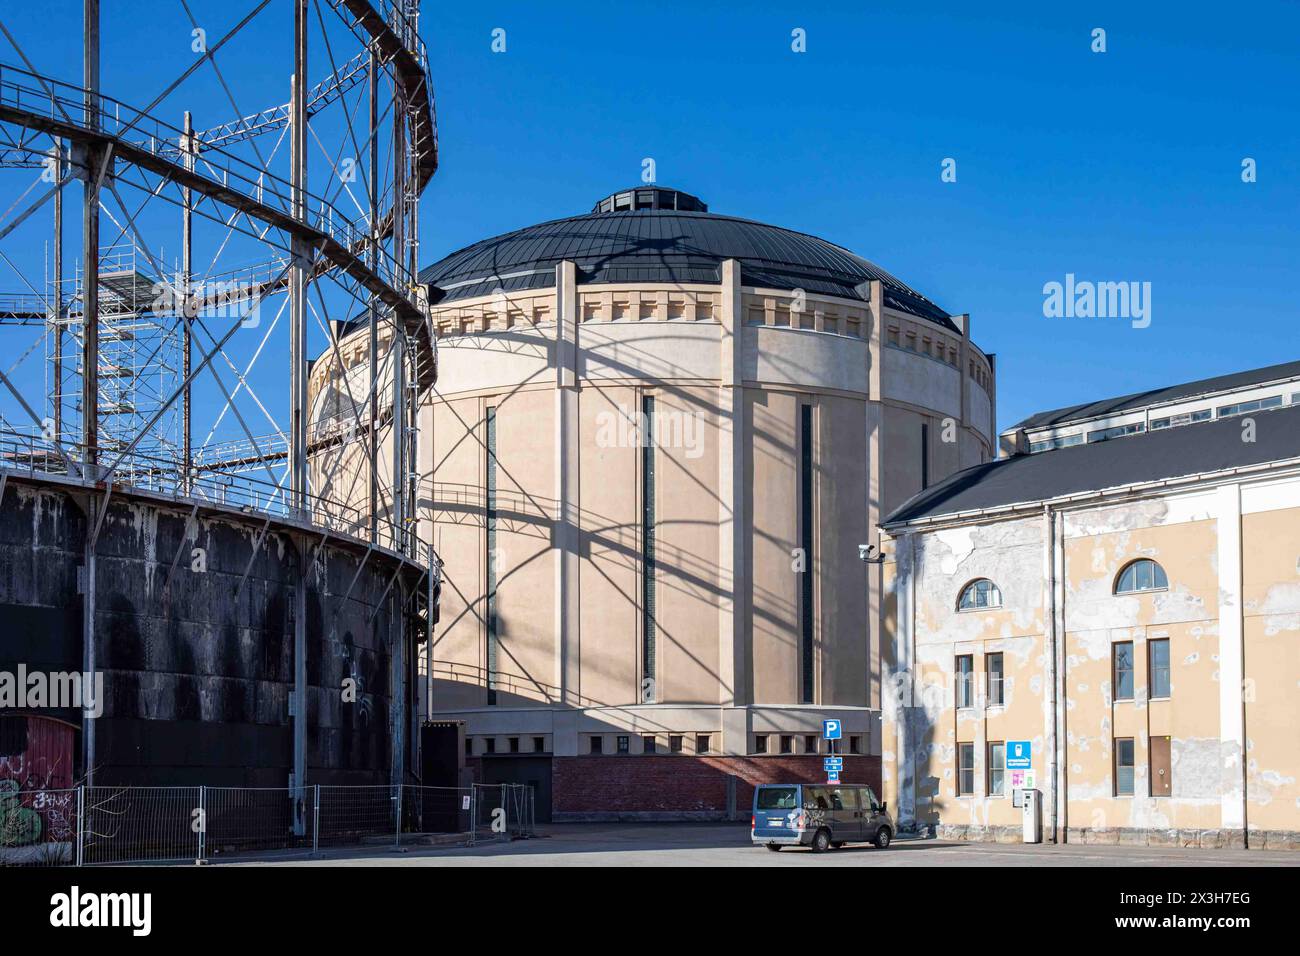 Old gasometers or gas holders against clear blue sky in Suvilahti district of Helsinki, Finland Stock Photo